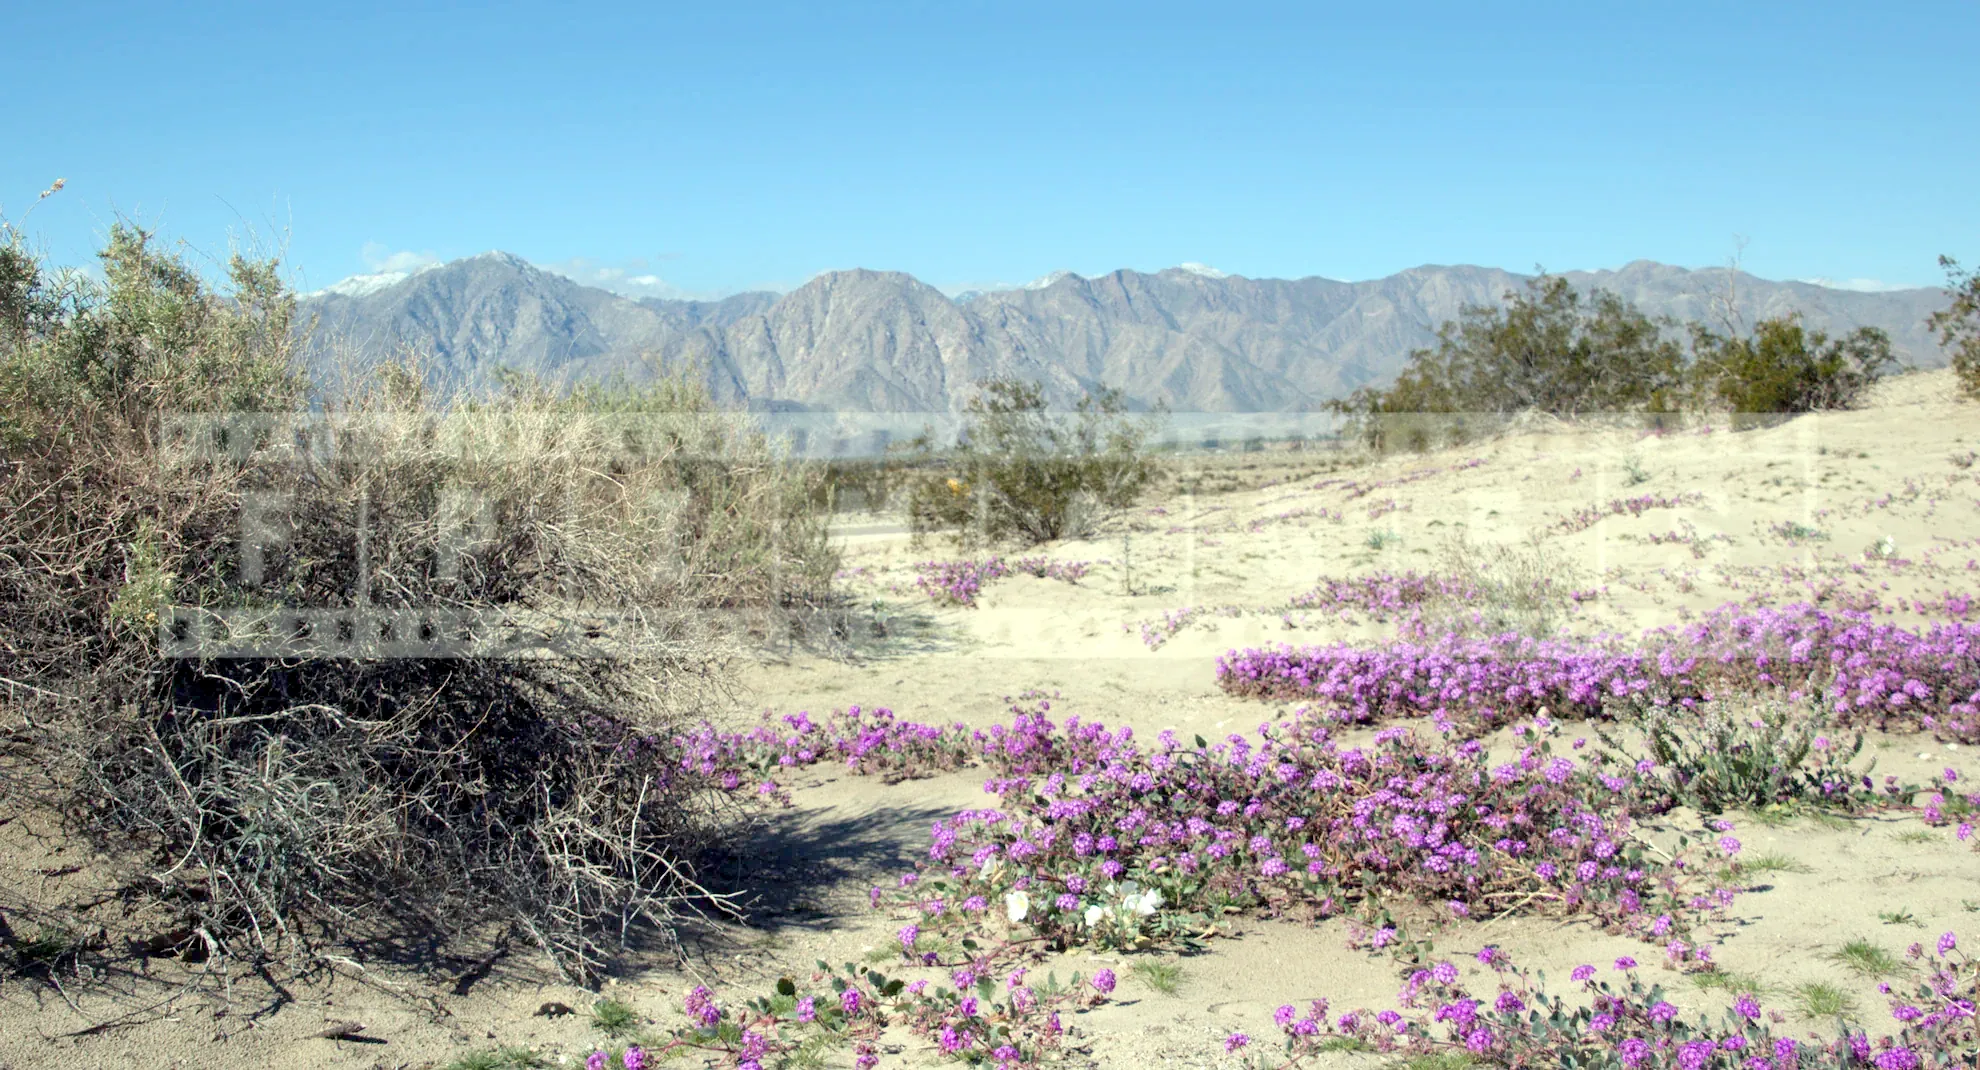 This image beautifully captures the contrast between the arid desert and the lively bloom of wildflowers.